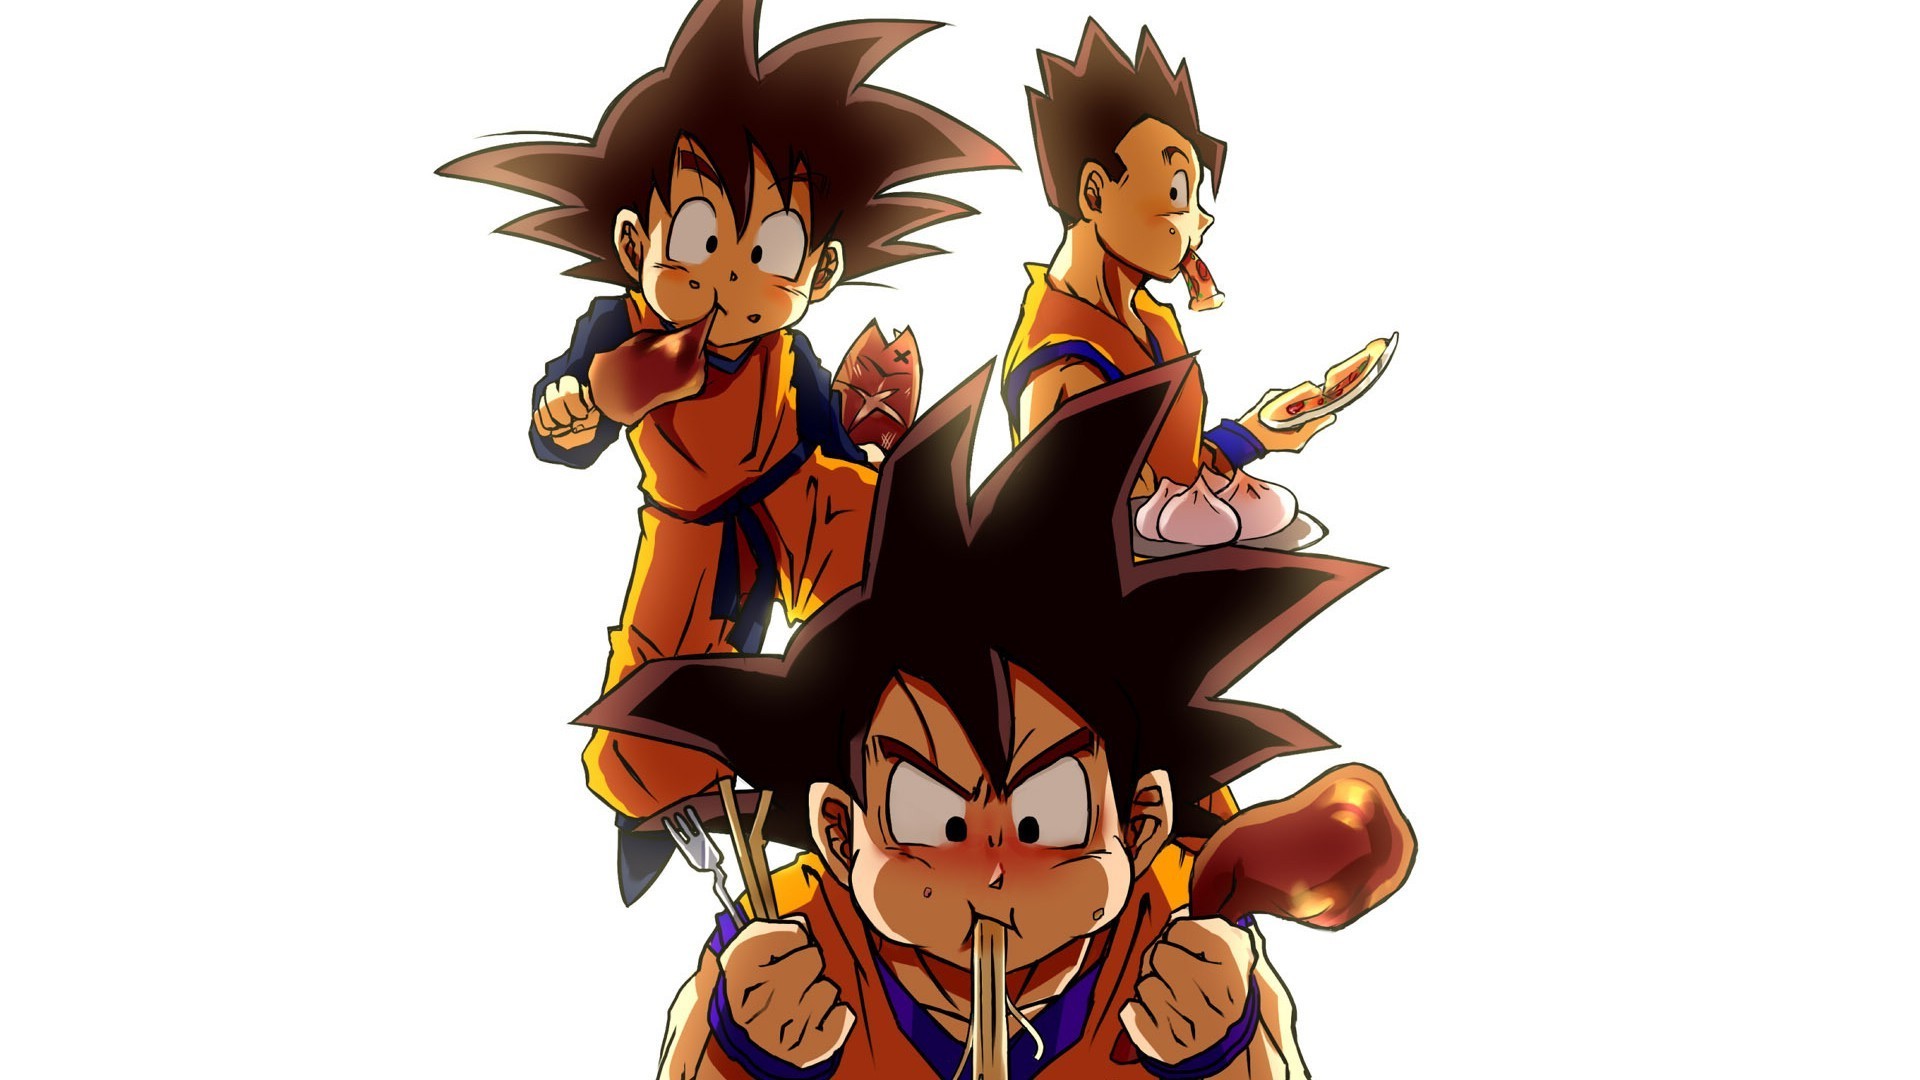 Kid Goku HD Wallpaper with image resolution 1920x1080 pixel. You can make this wallpaper for your Desktop Computer Backgrounds, Mac Wallpapers, Android Lock screen or iPhone Screensavers